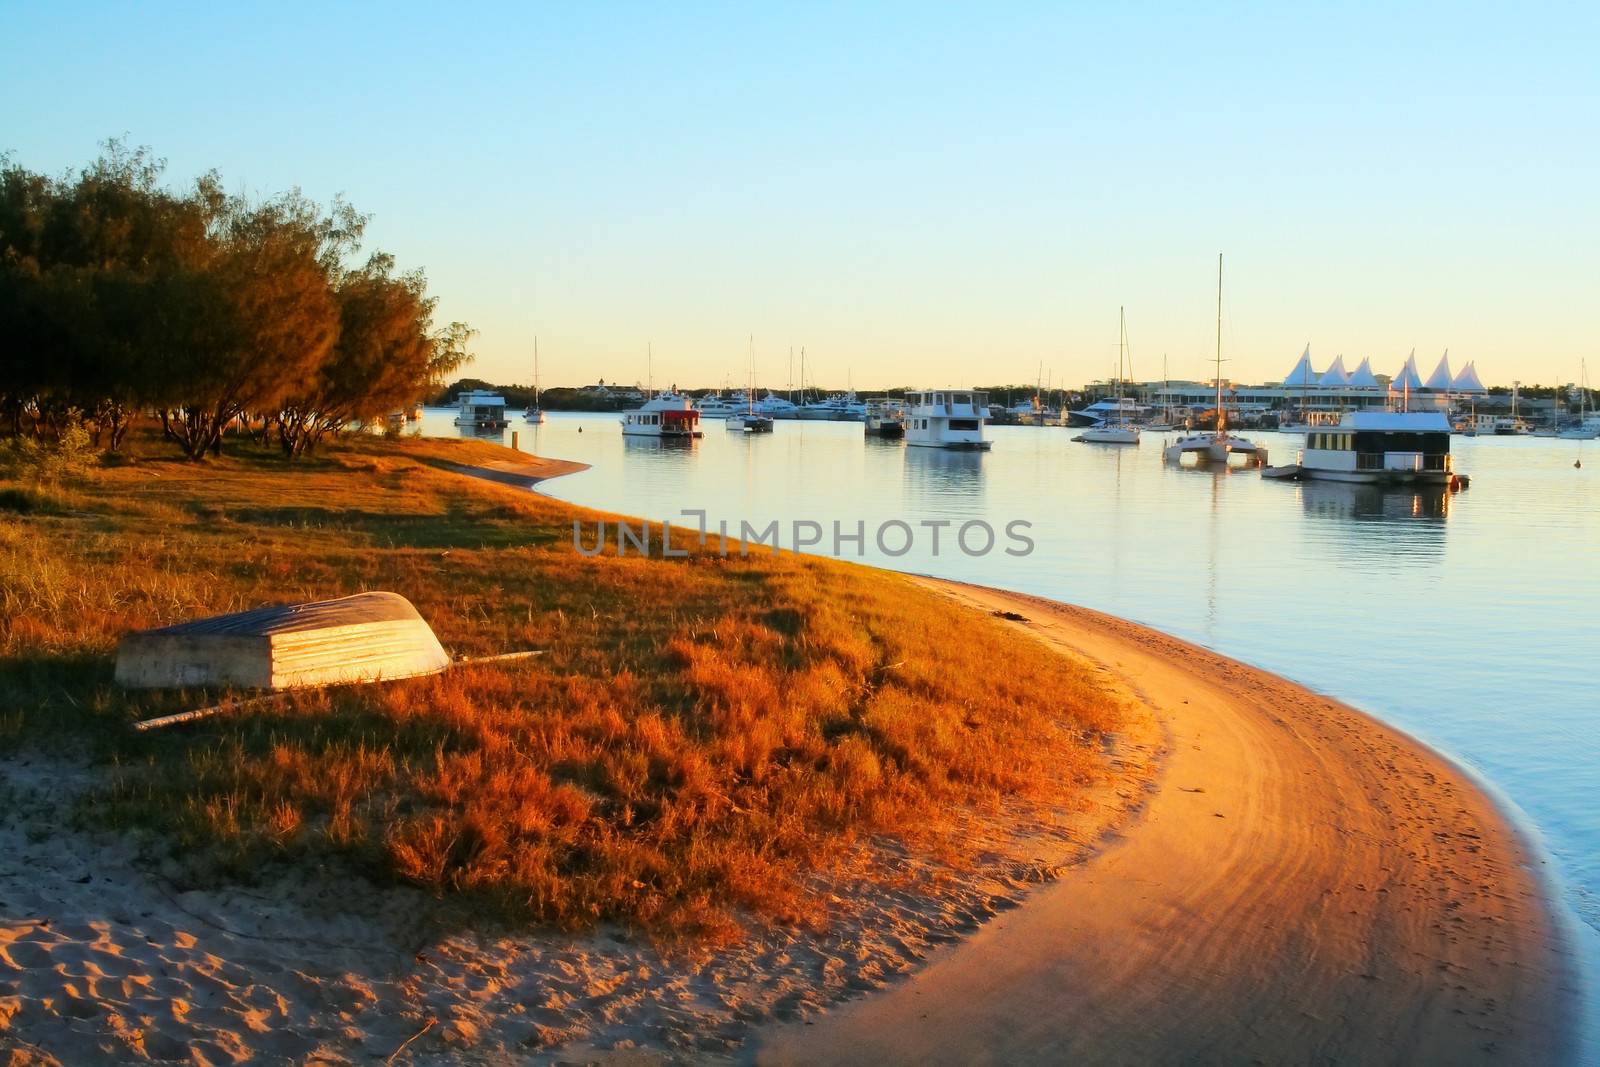 Houseboats and yachts moored in the Broadwater Gold Coast Australia on a golden morning.